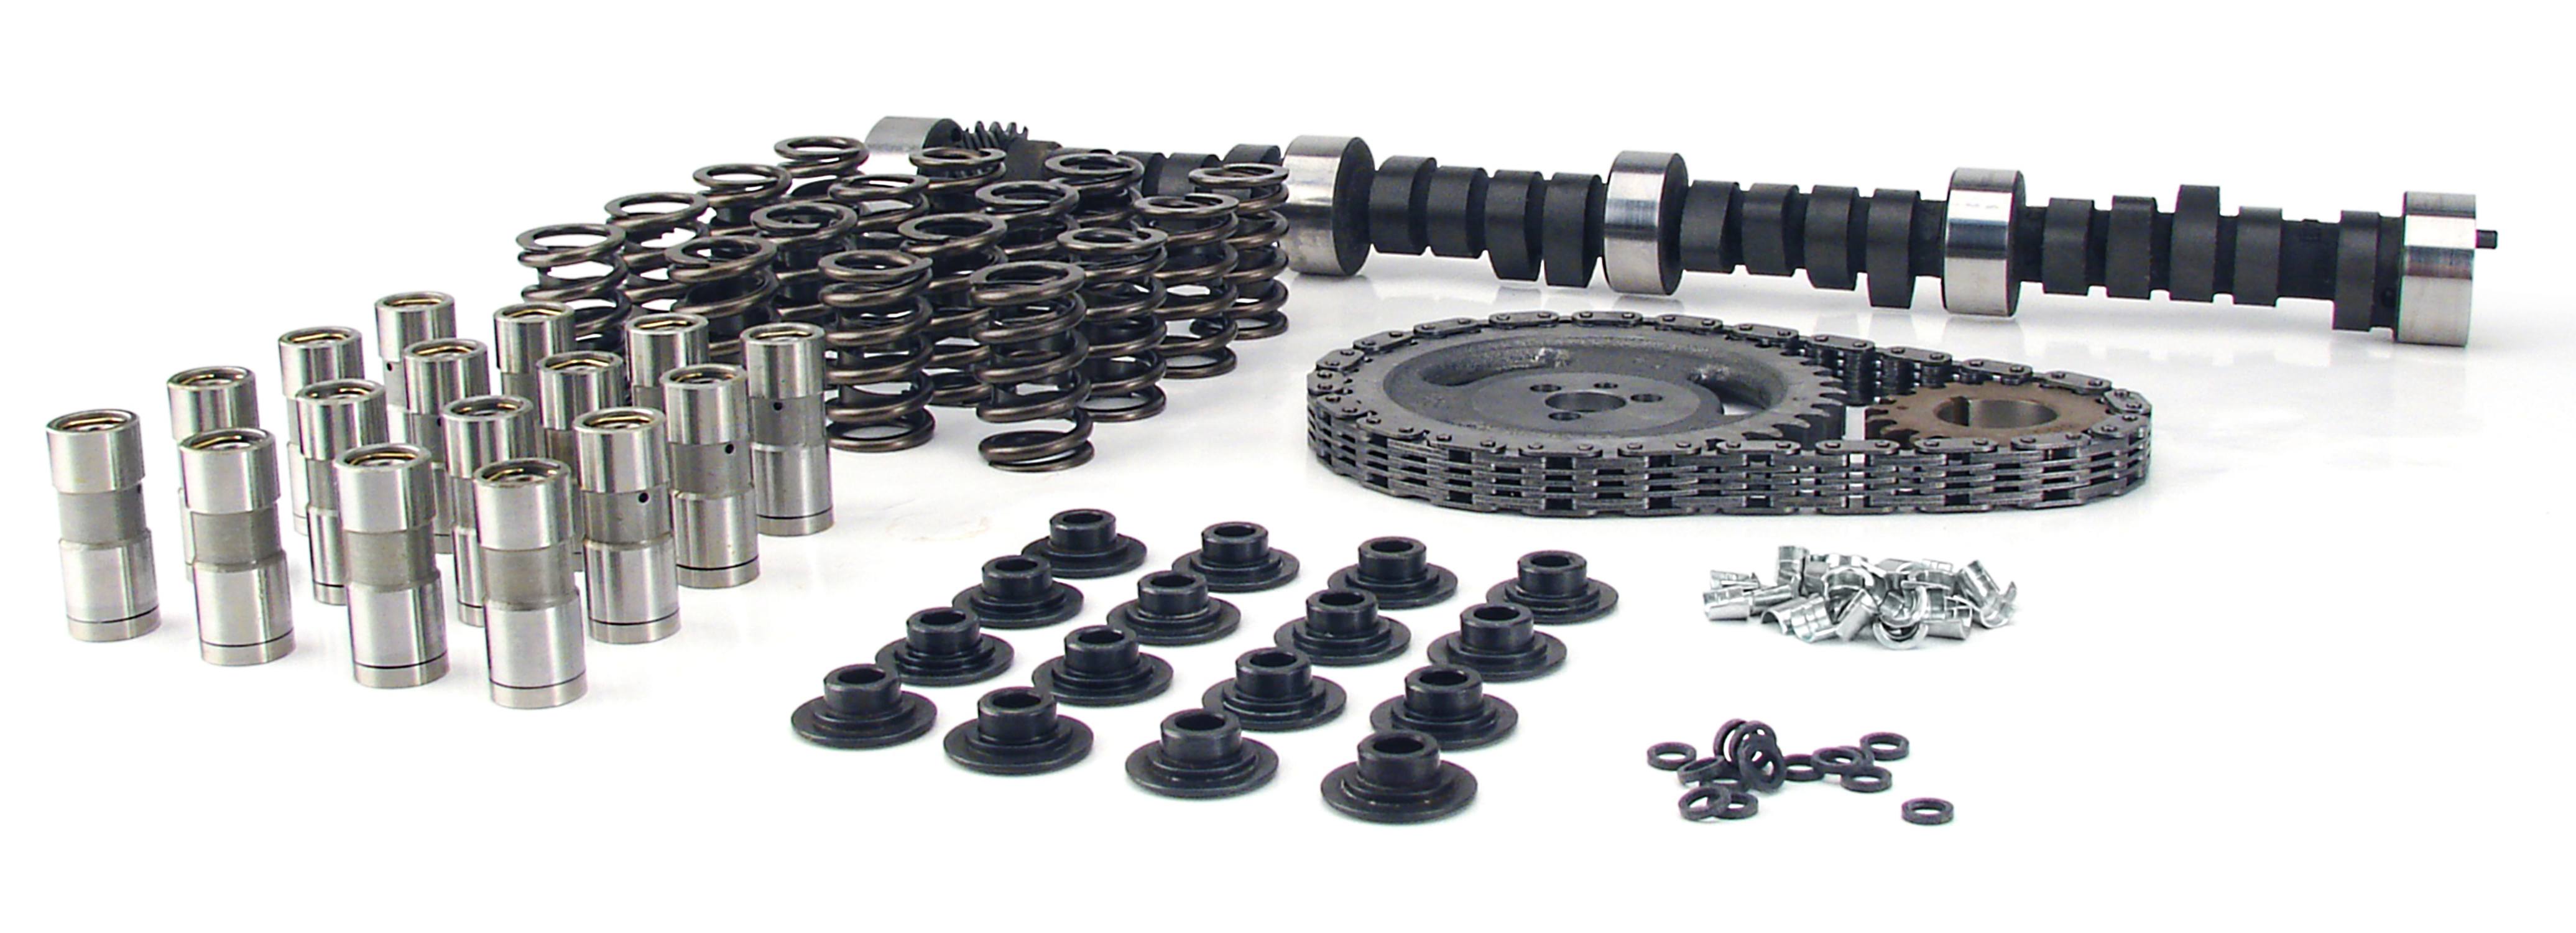 Set of 16 Single Springs w/ 1.254" O.D., 1.254" I.D., 1.700" Installed Height - K12-674-4